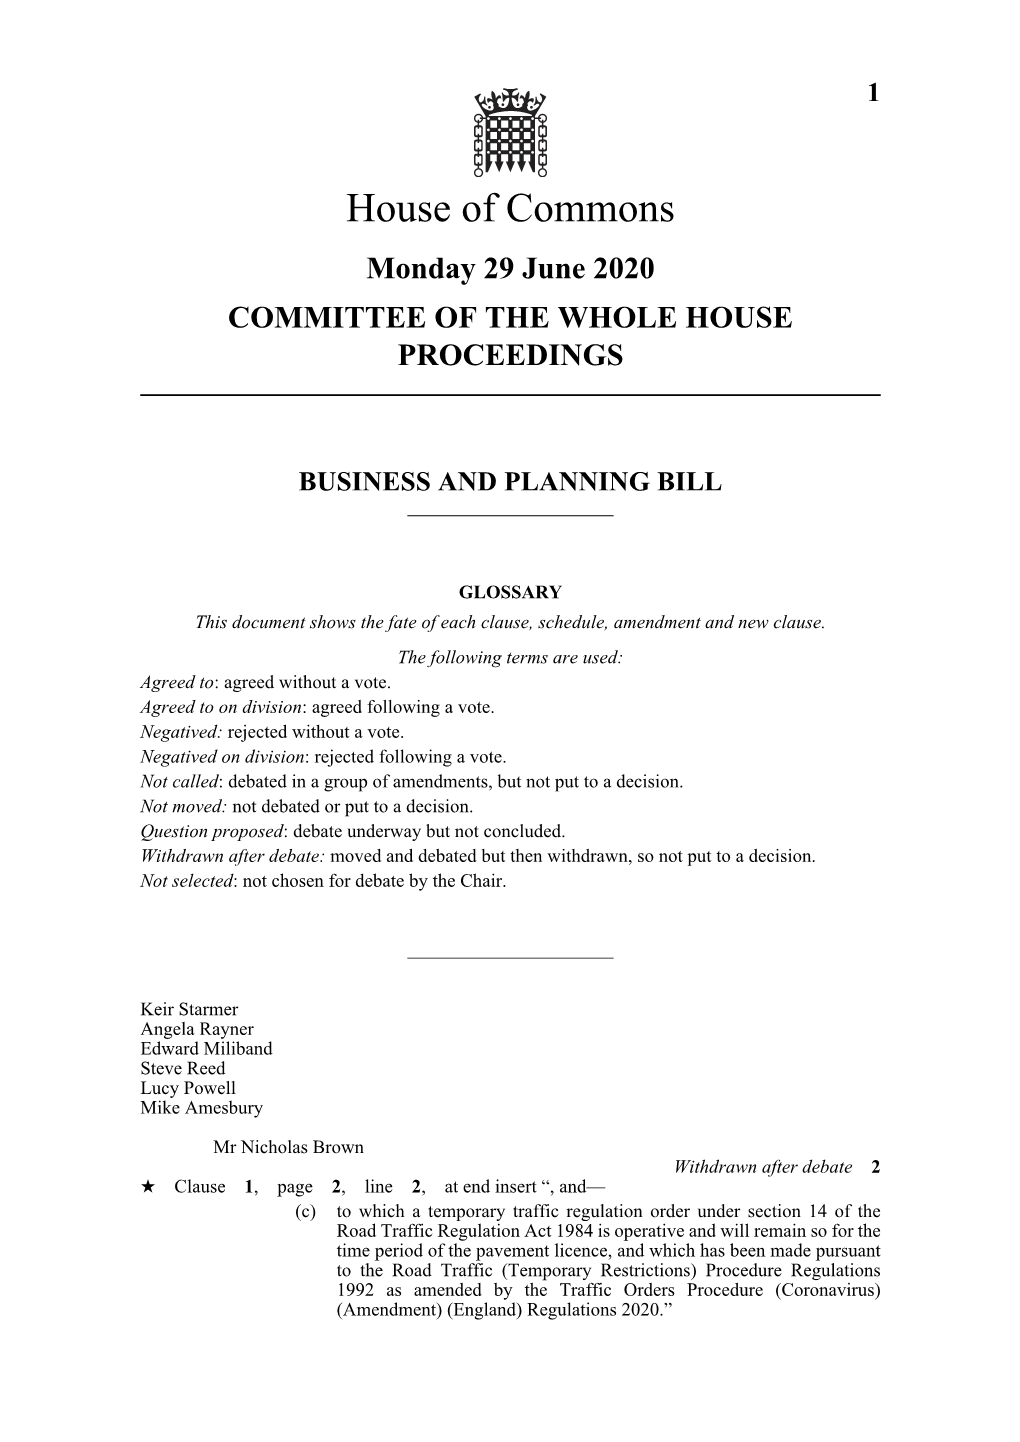 Business and Planning Bill